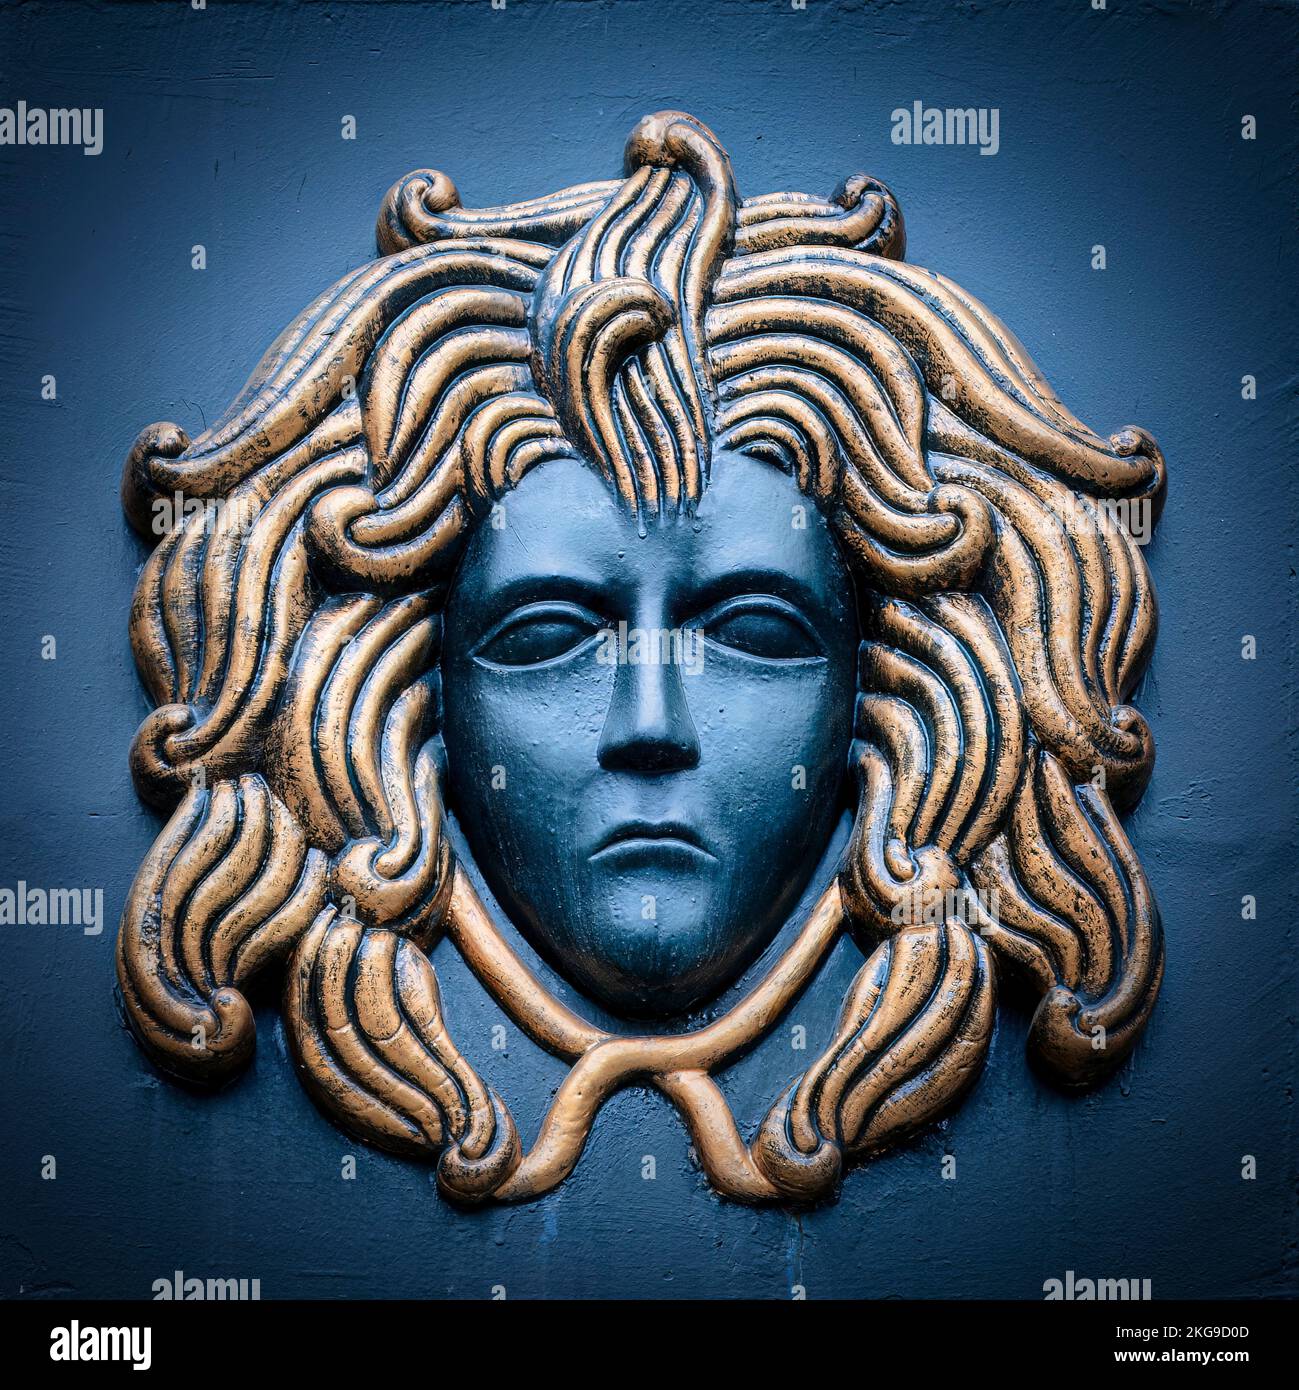 A classic depiction of the head of Medusa the Gorgon from ancient mythology located in Instanbul, Turkey. Stock Photo